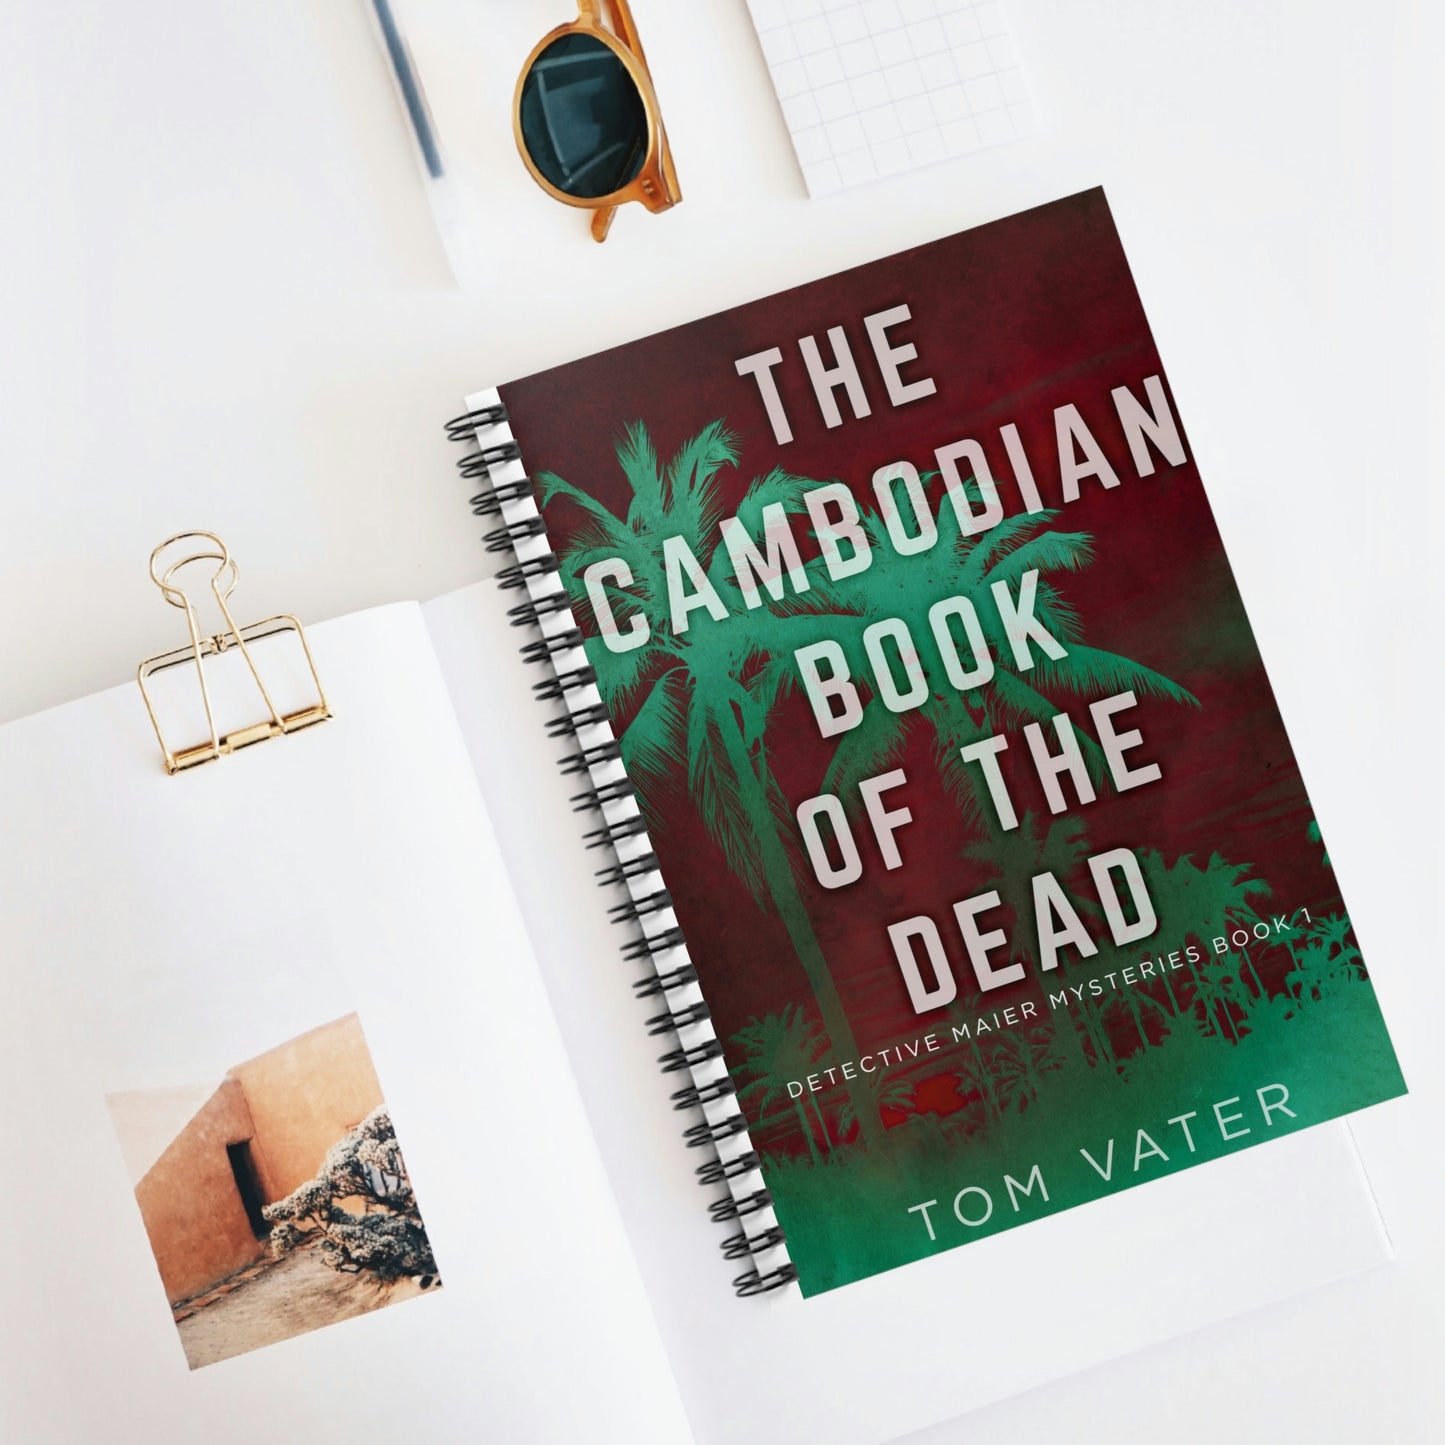 The Cambodian Book Of The Dead - Spiral Notebook